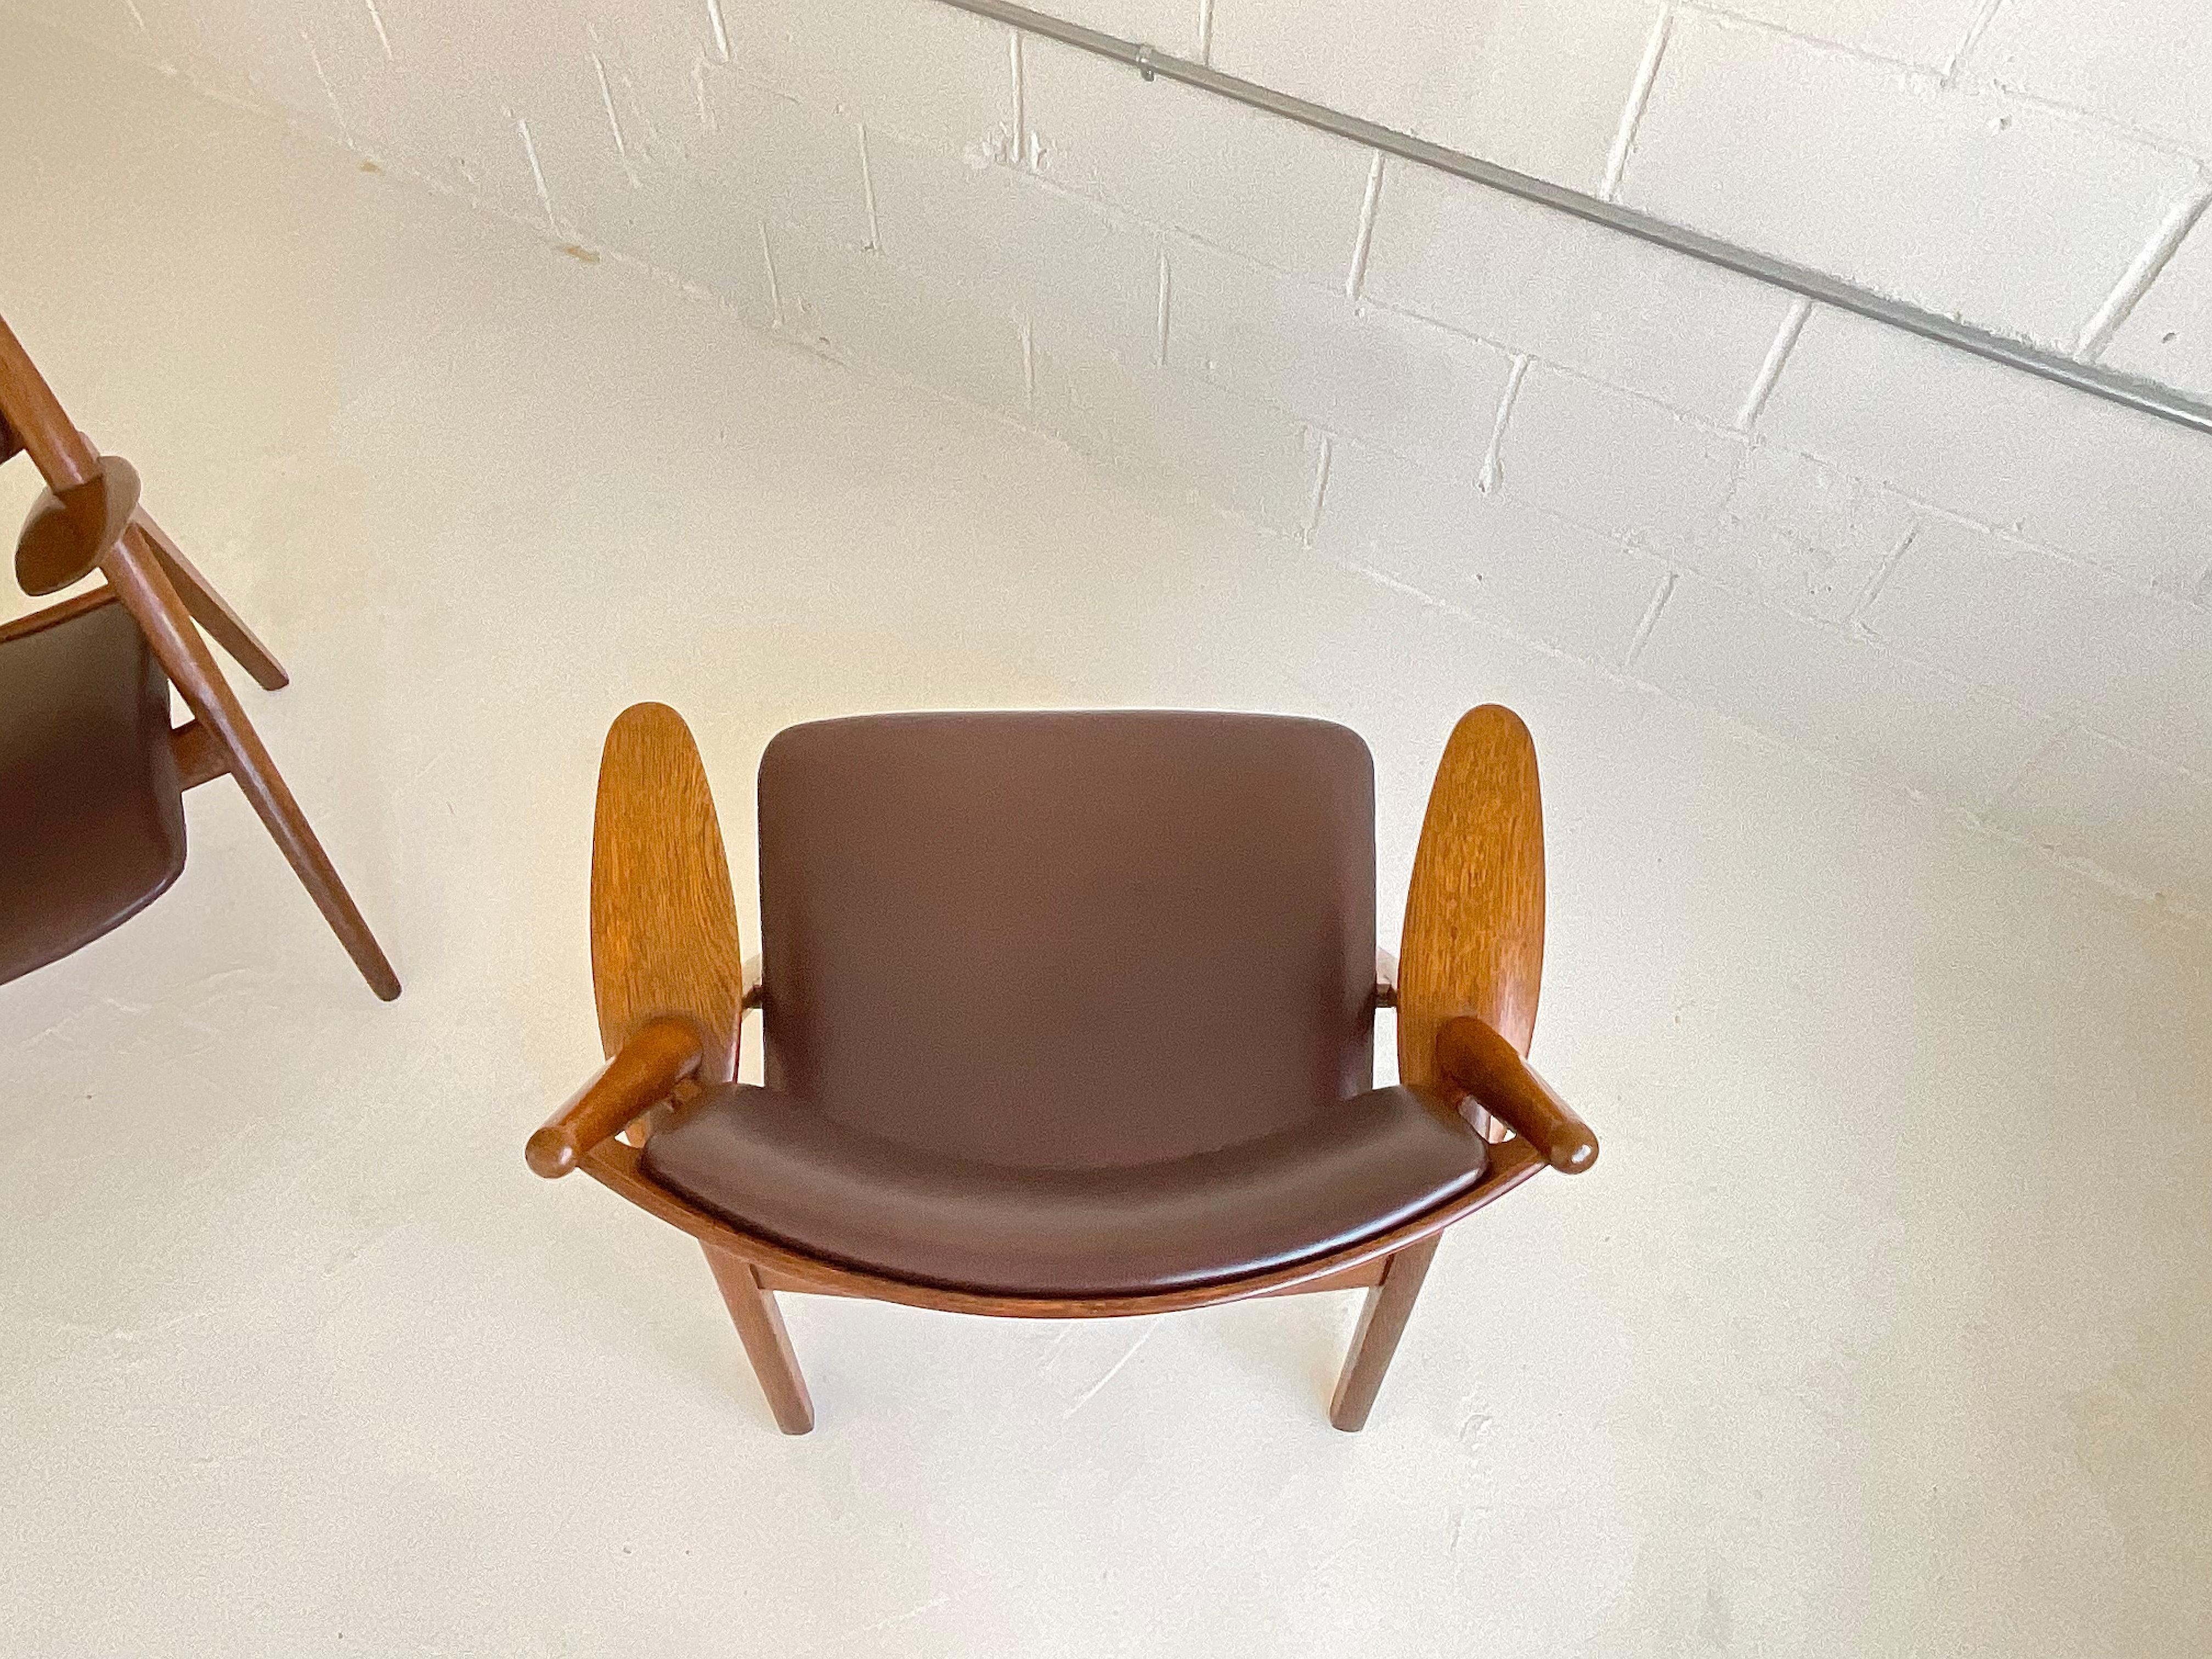 Hans Wegner Vintage Sawbuck Chairs for Carl Hansen CH28 in Oak & Leather, 1951 For Sale 12